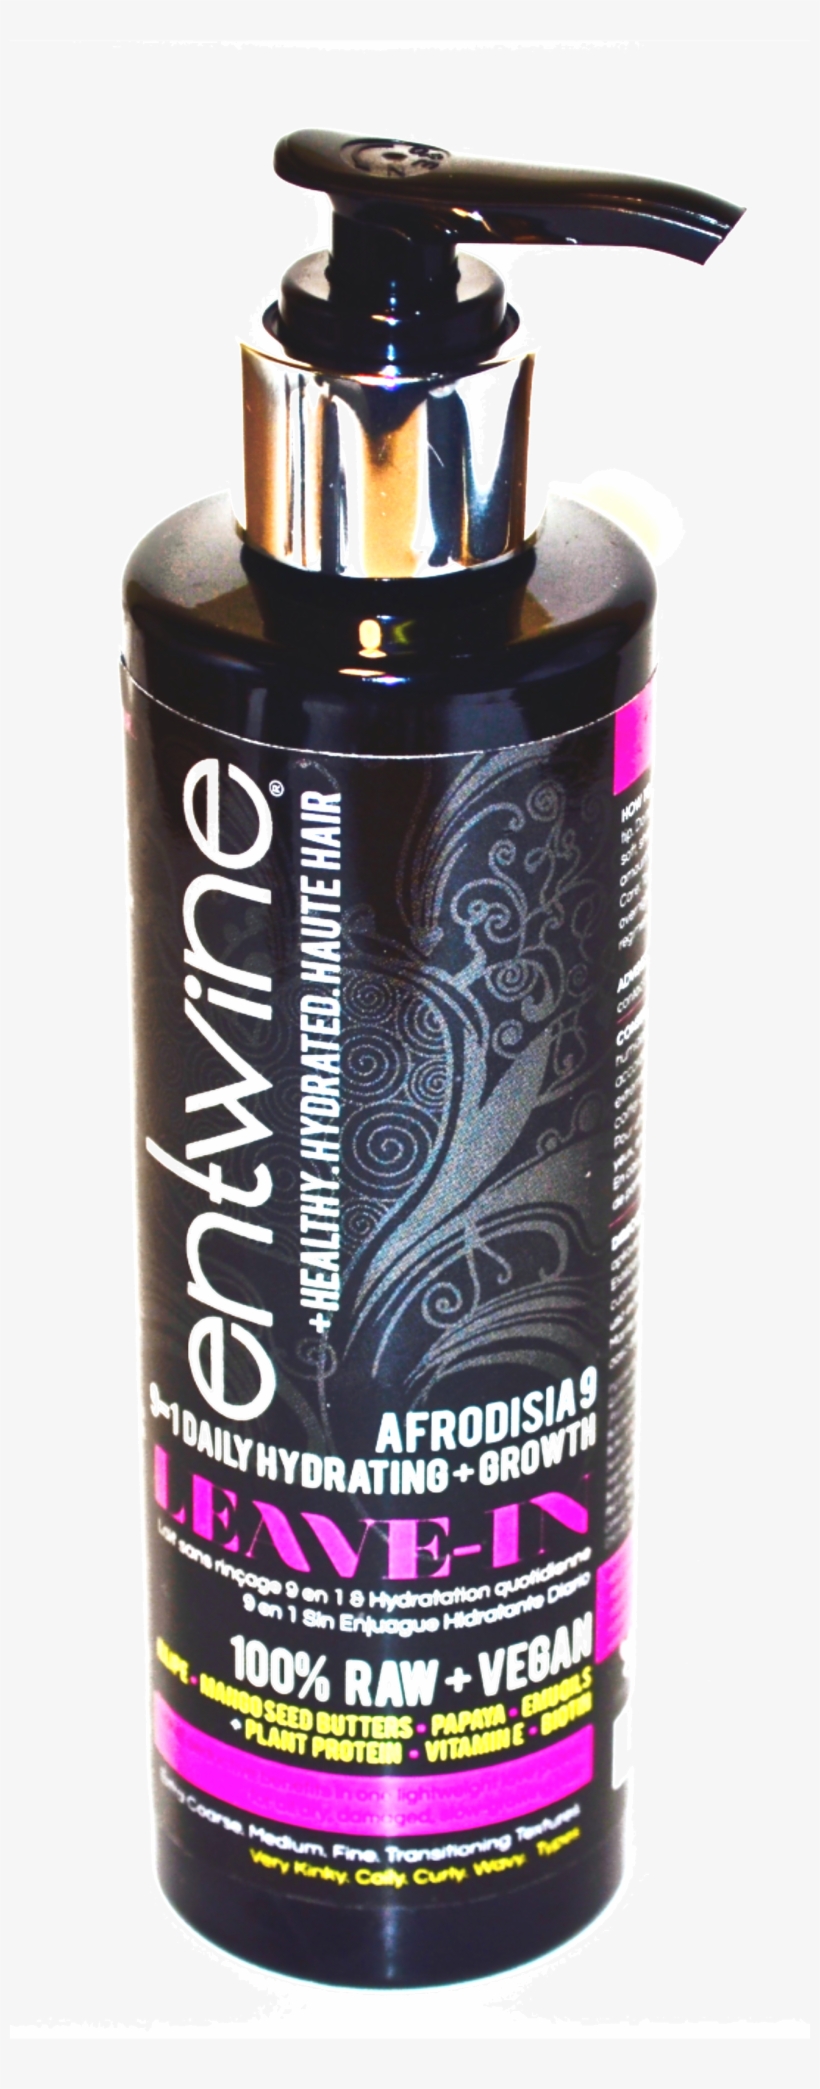 Entwine {afrodisia 9} Exotique Leave-in Hair Potion - Entwine {afrodisia 9} Exotique Leave-in Hair Potion,, transparent png #5143648